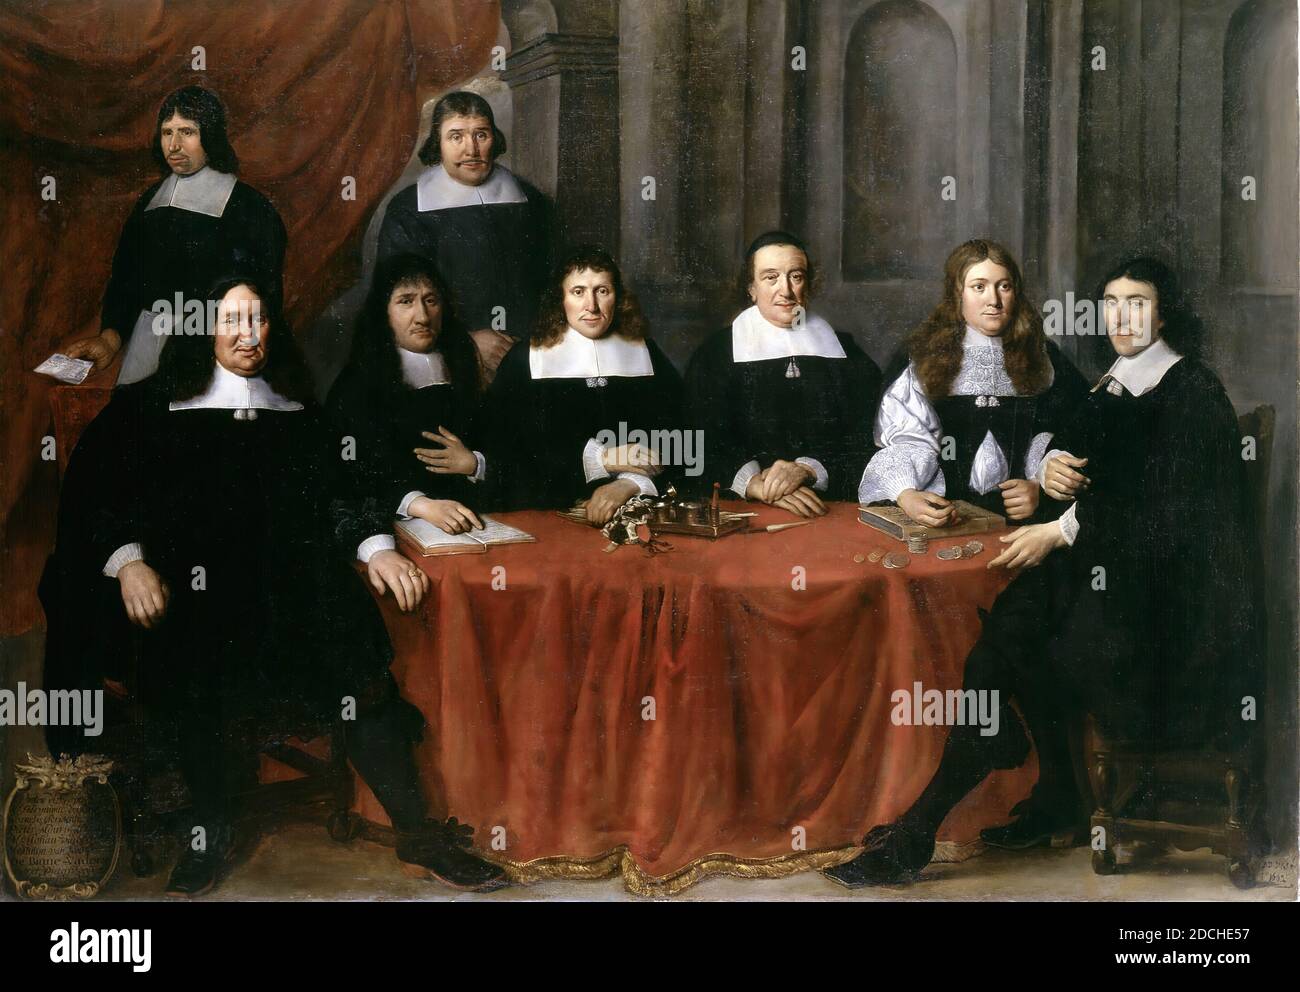 painting, Jan de Vos (IV), 1659, Signature front, bottom left: J.D. Vos fecit Ao 1659, canvas, oil paint, 141 x 239.5 cm, painting depicting regents and inner fathers of the St. Catherine's guest house. Group portrait in the original carved frame with the weapons and (not everywhere correct) names. Sitting around a table covered with a smyrna carpet, visible below the knees, men in black robes with square flat white collars dressed with white tassels. On the left of the table is a parchment-bound book, with St. Catharinen Gasthuijs 1659, with a pewter ink set. The background shows barely Stock Photo